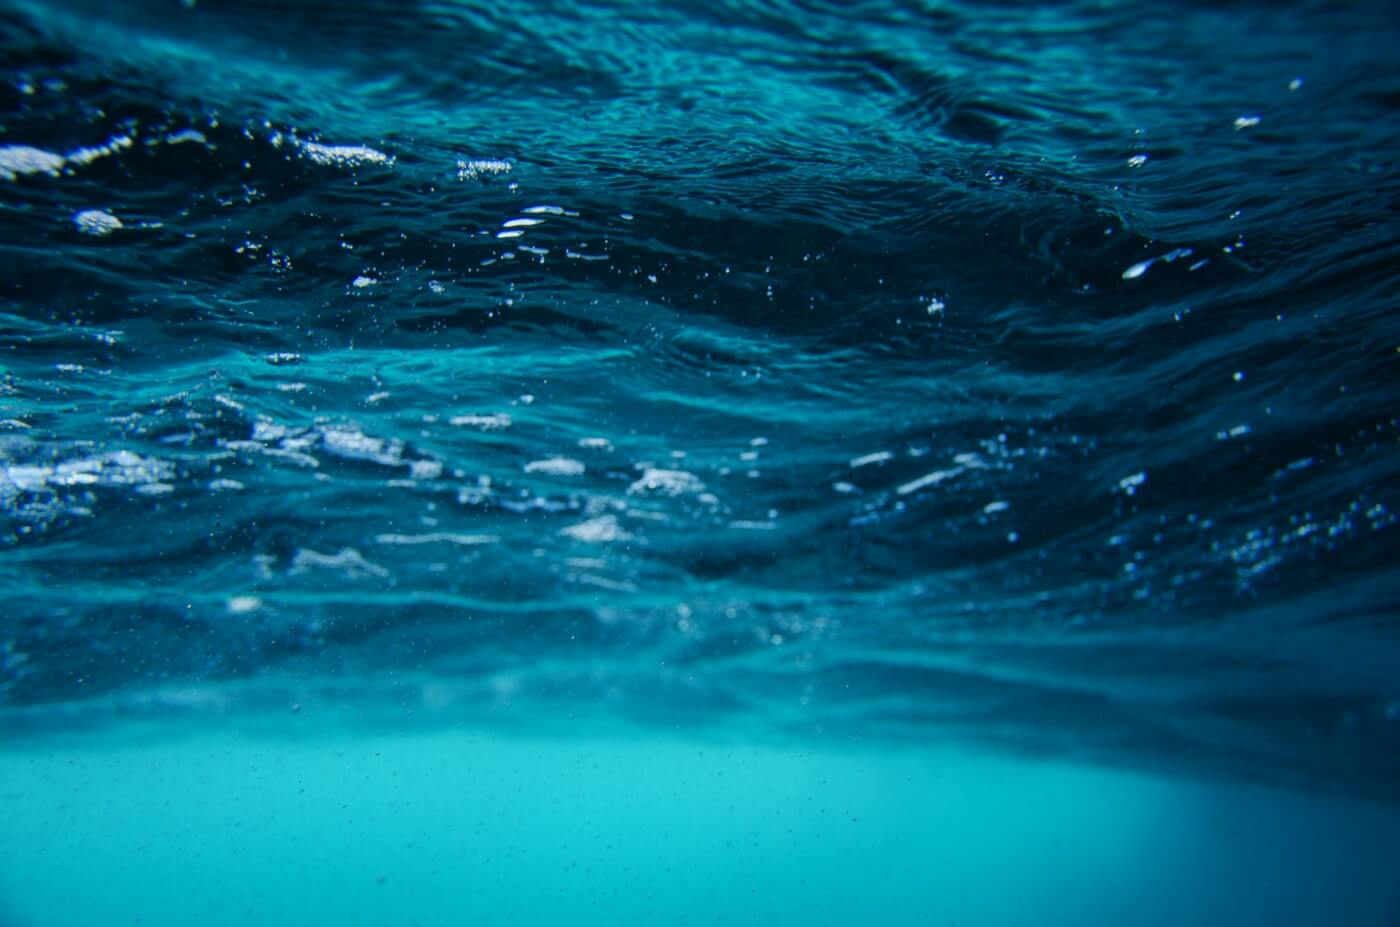 A close up of bright blue water